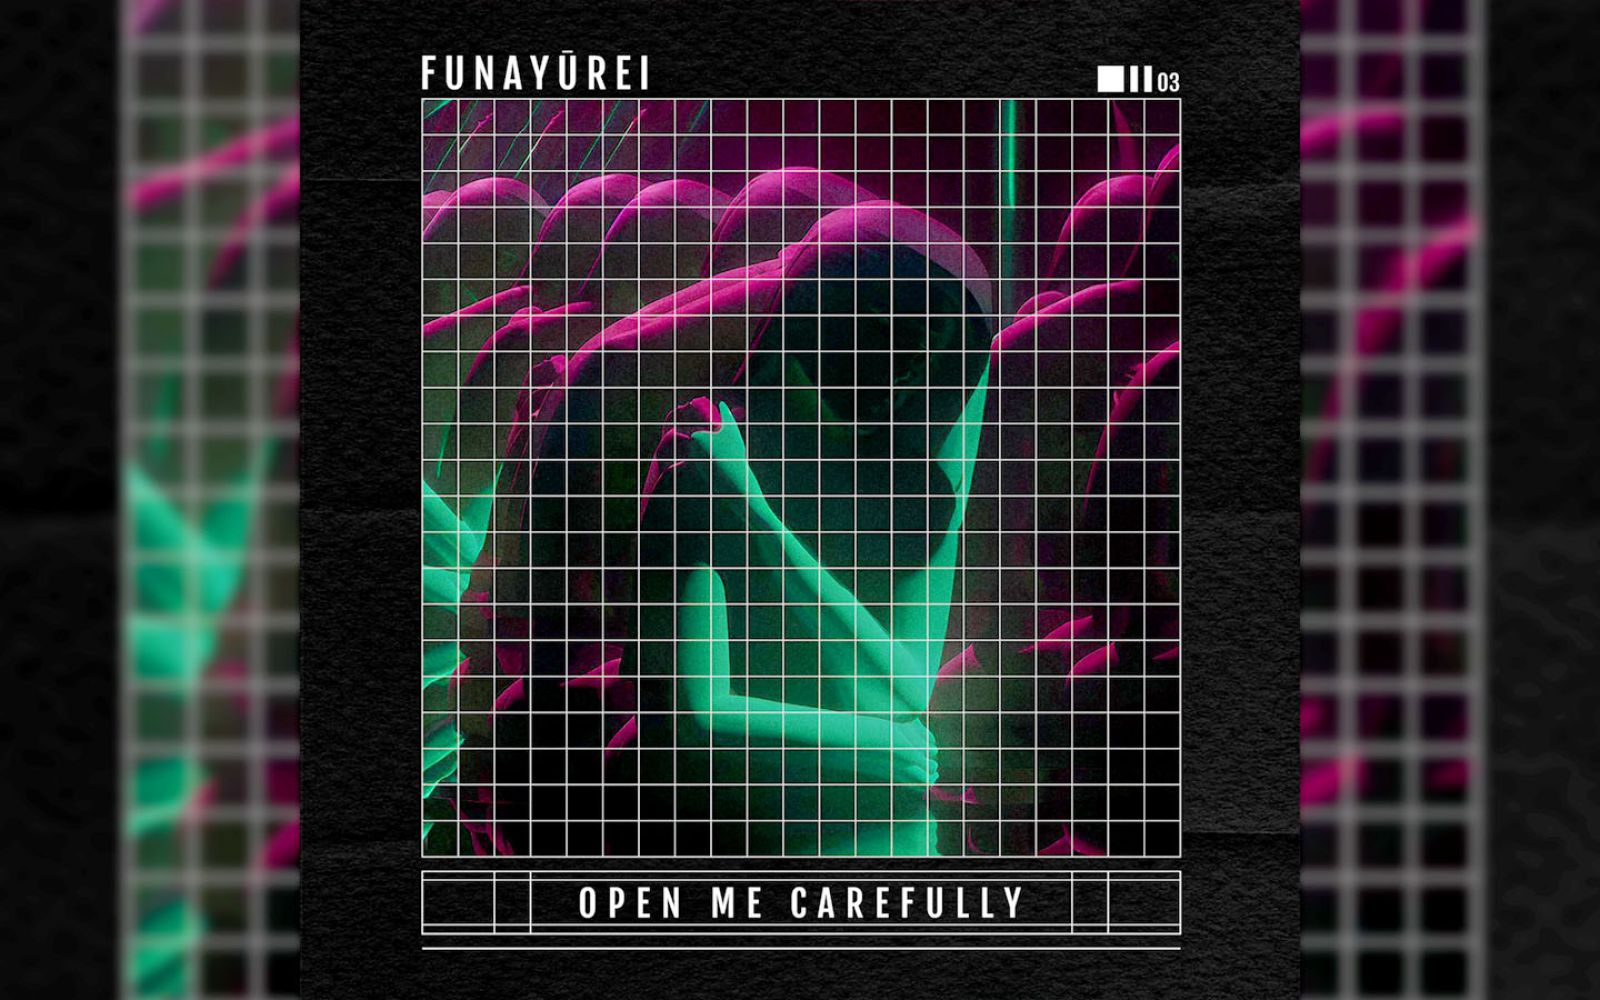 Synthpop duo Funayurei have released a new album.